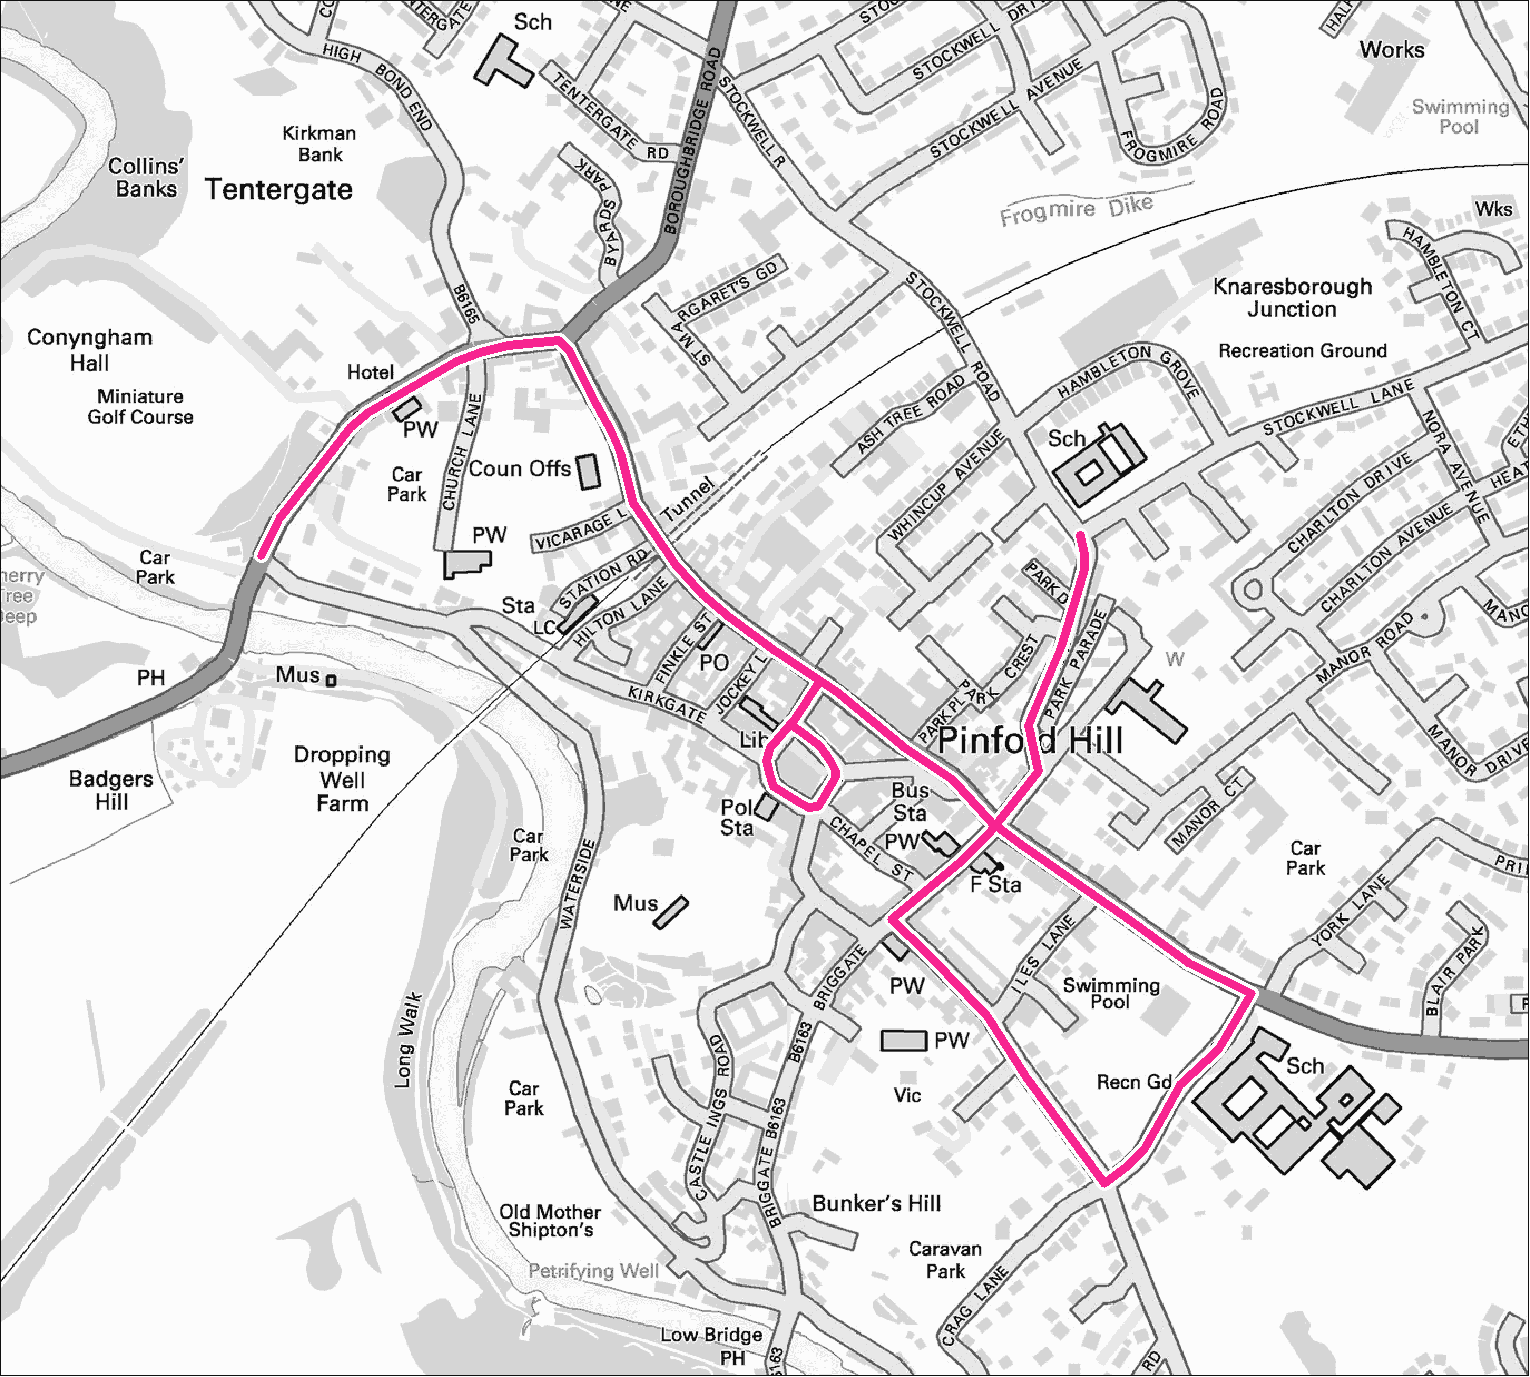 Knaresborough footpath gritting map. Contact us for this information in a different format.